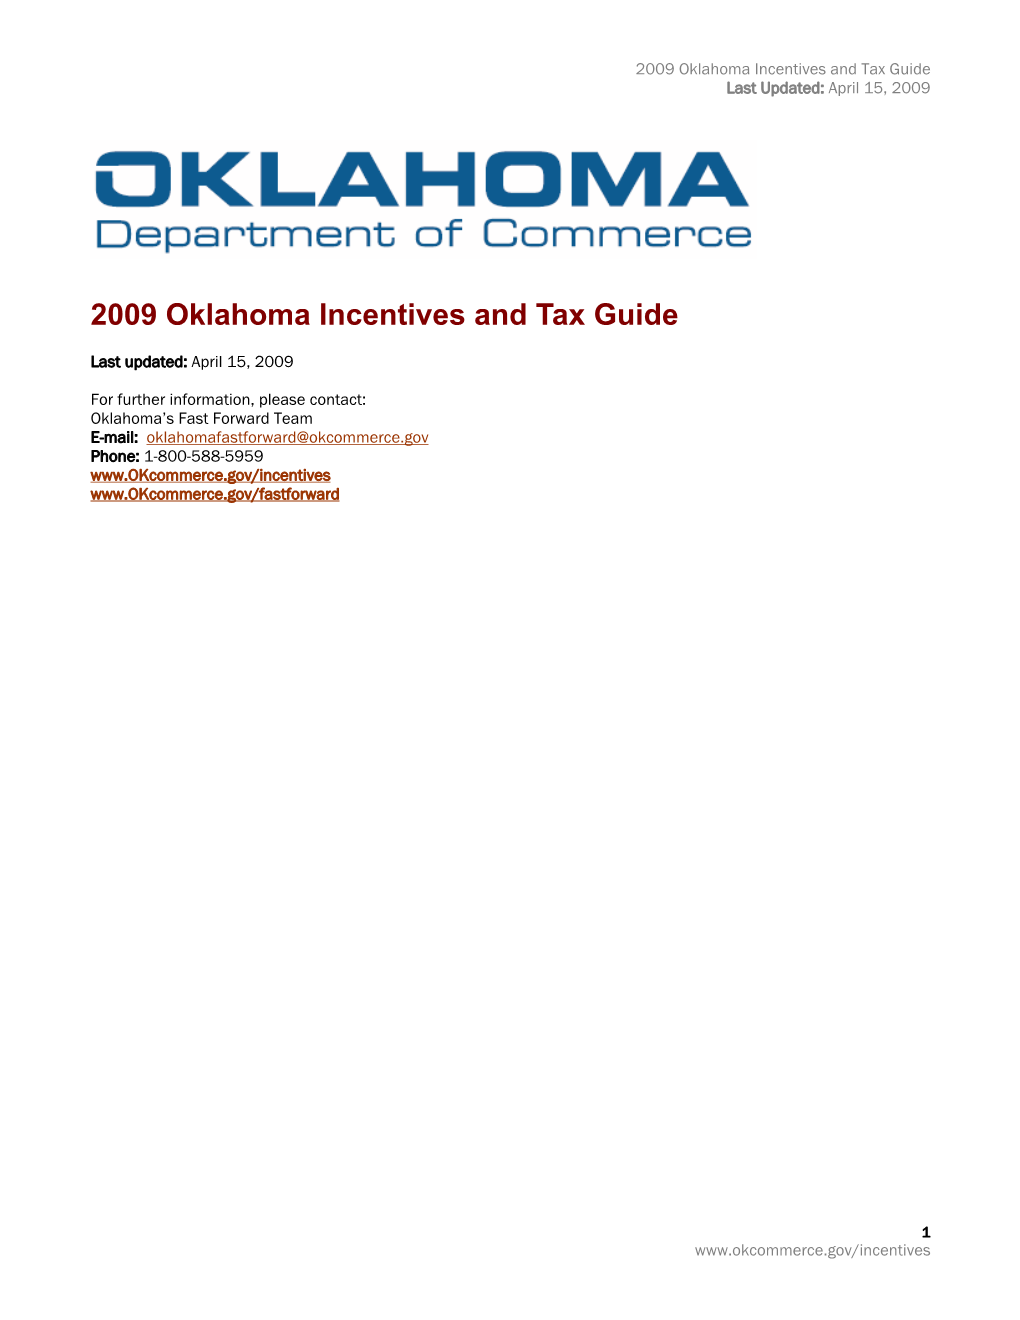 2009 Oklahoma Incentives and Tax Guide Last Updated: April 15, 2009